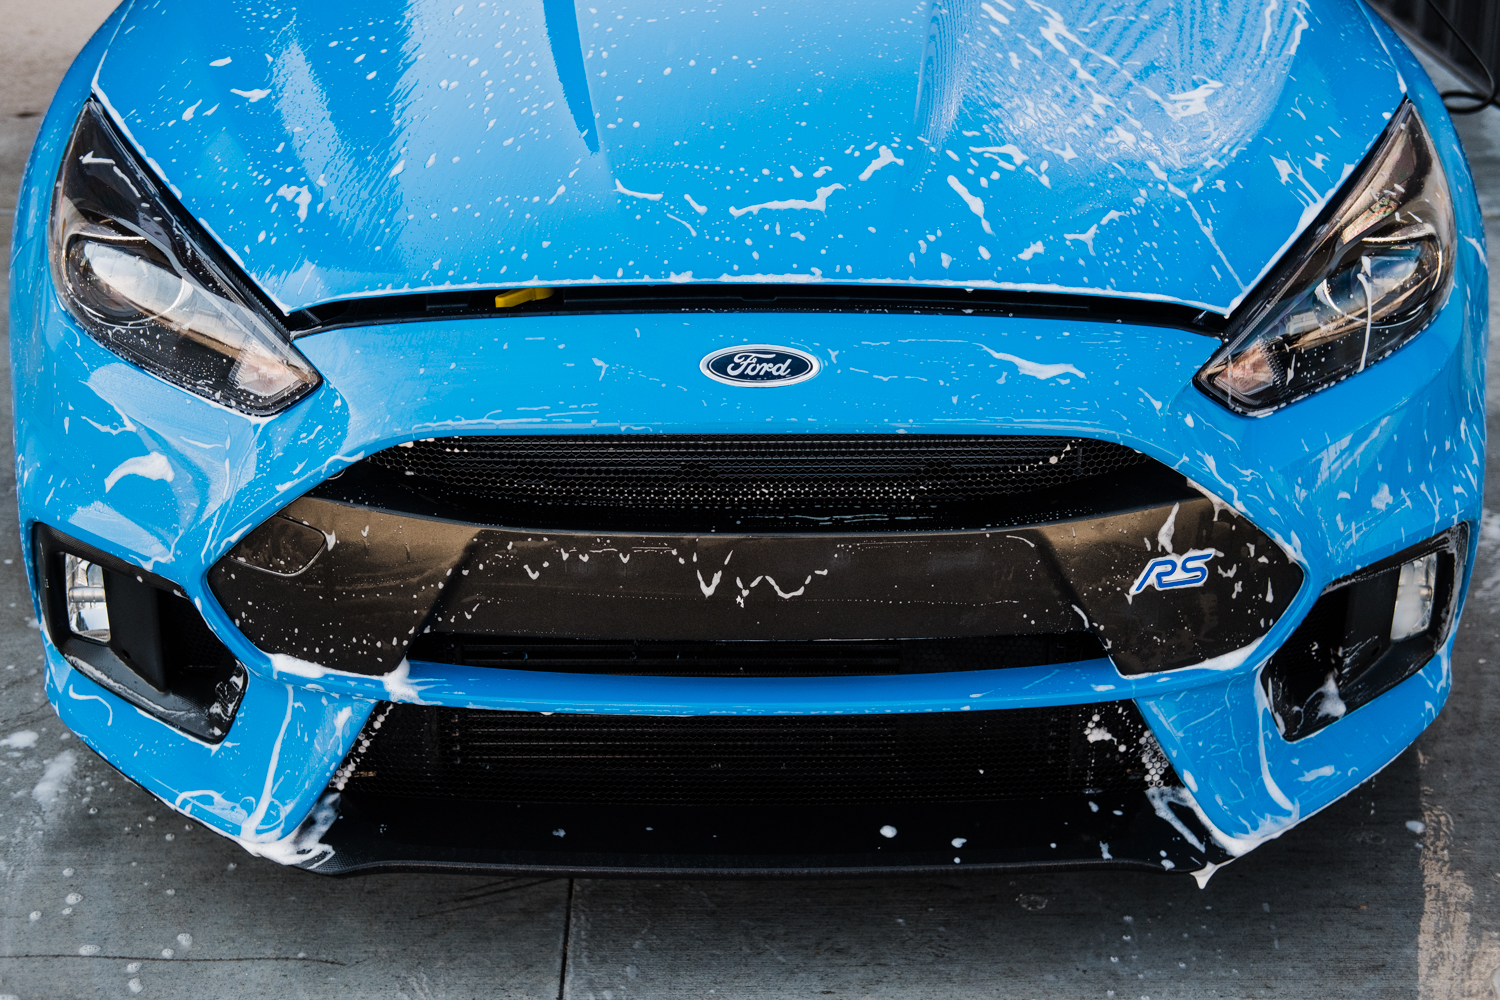 Ford Focus RS-XPEL Ultimate Paint Protection Film-Car Wash-Car Detailing-Paint Protection Film-Clear Bra-Ford Performance-109.jpg